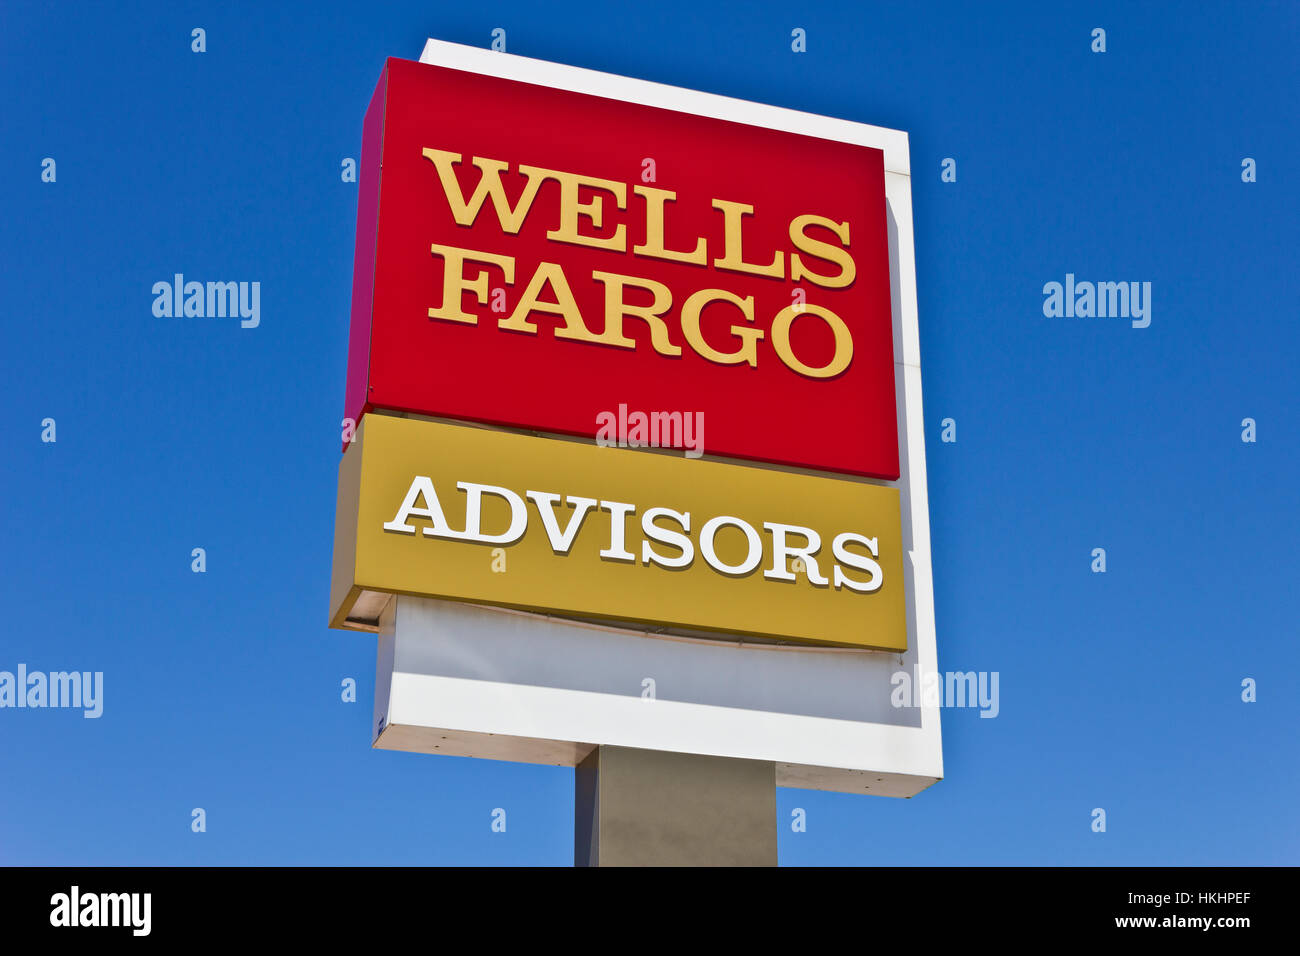 Indianapolis - Circa June 2016: A Wells Fargo Advisors  Branch. Wells Fargo is a Provider of Financial Services V Stock Photo